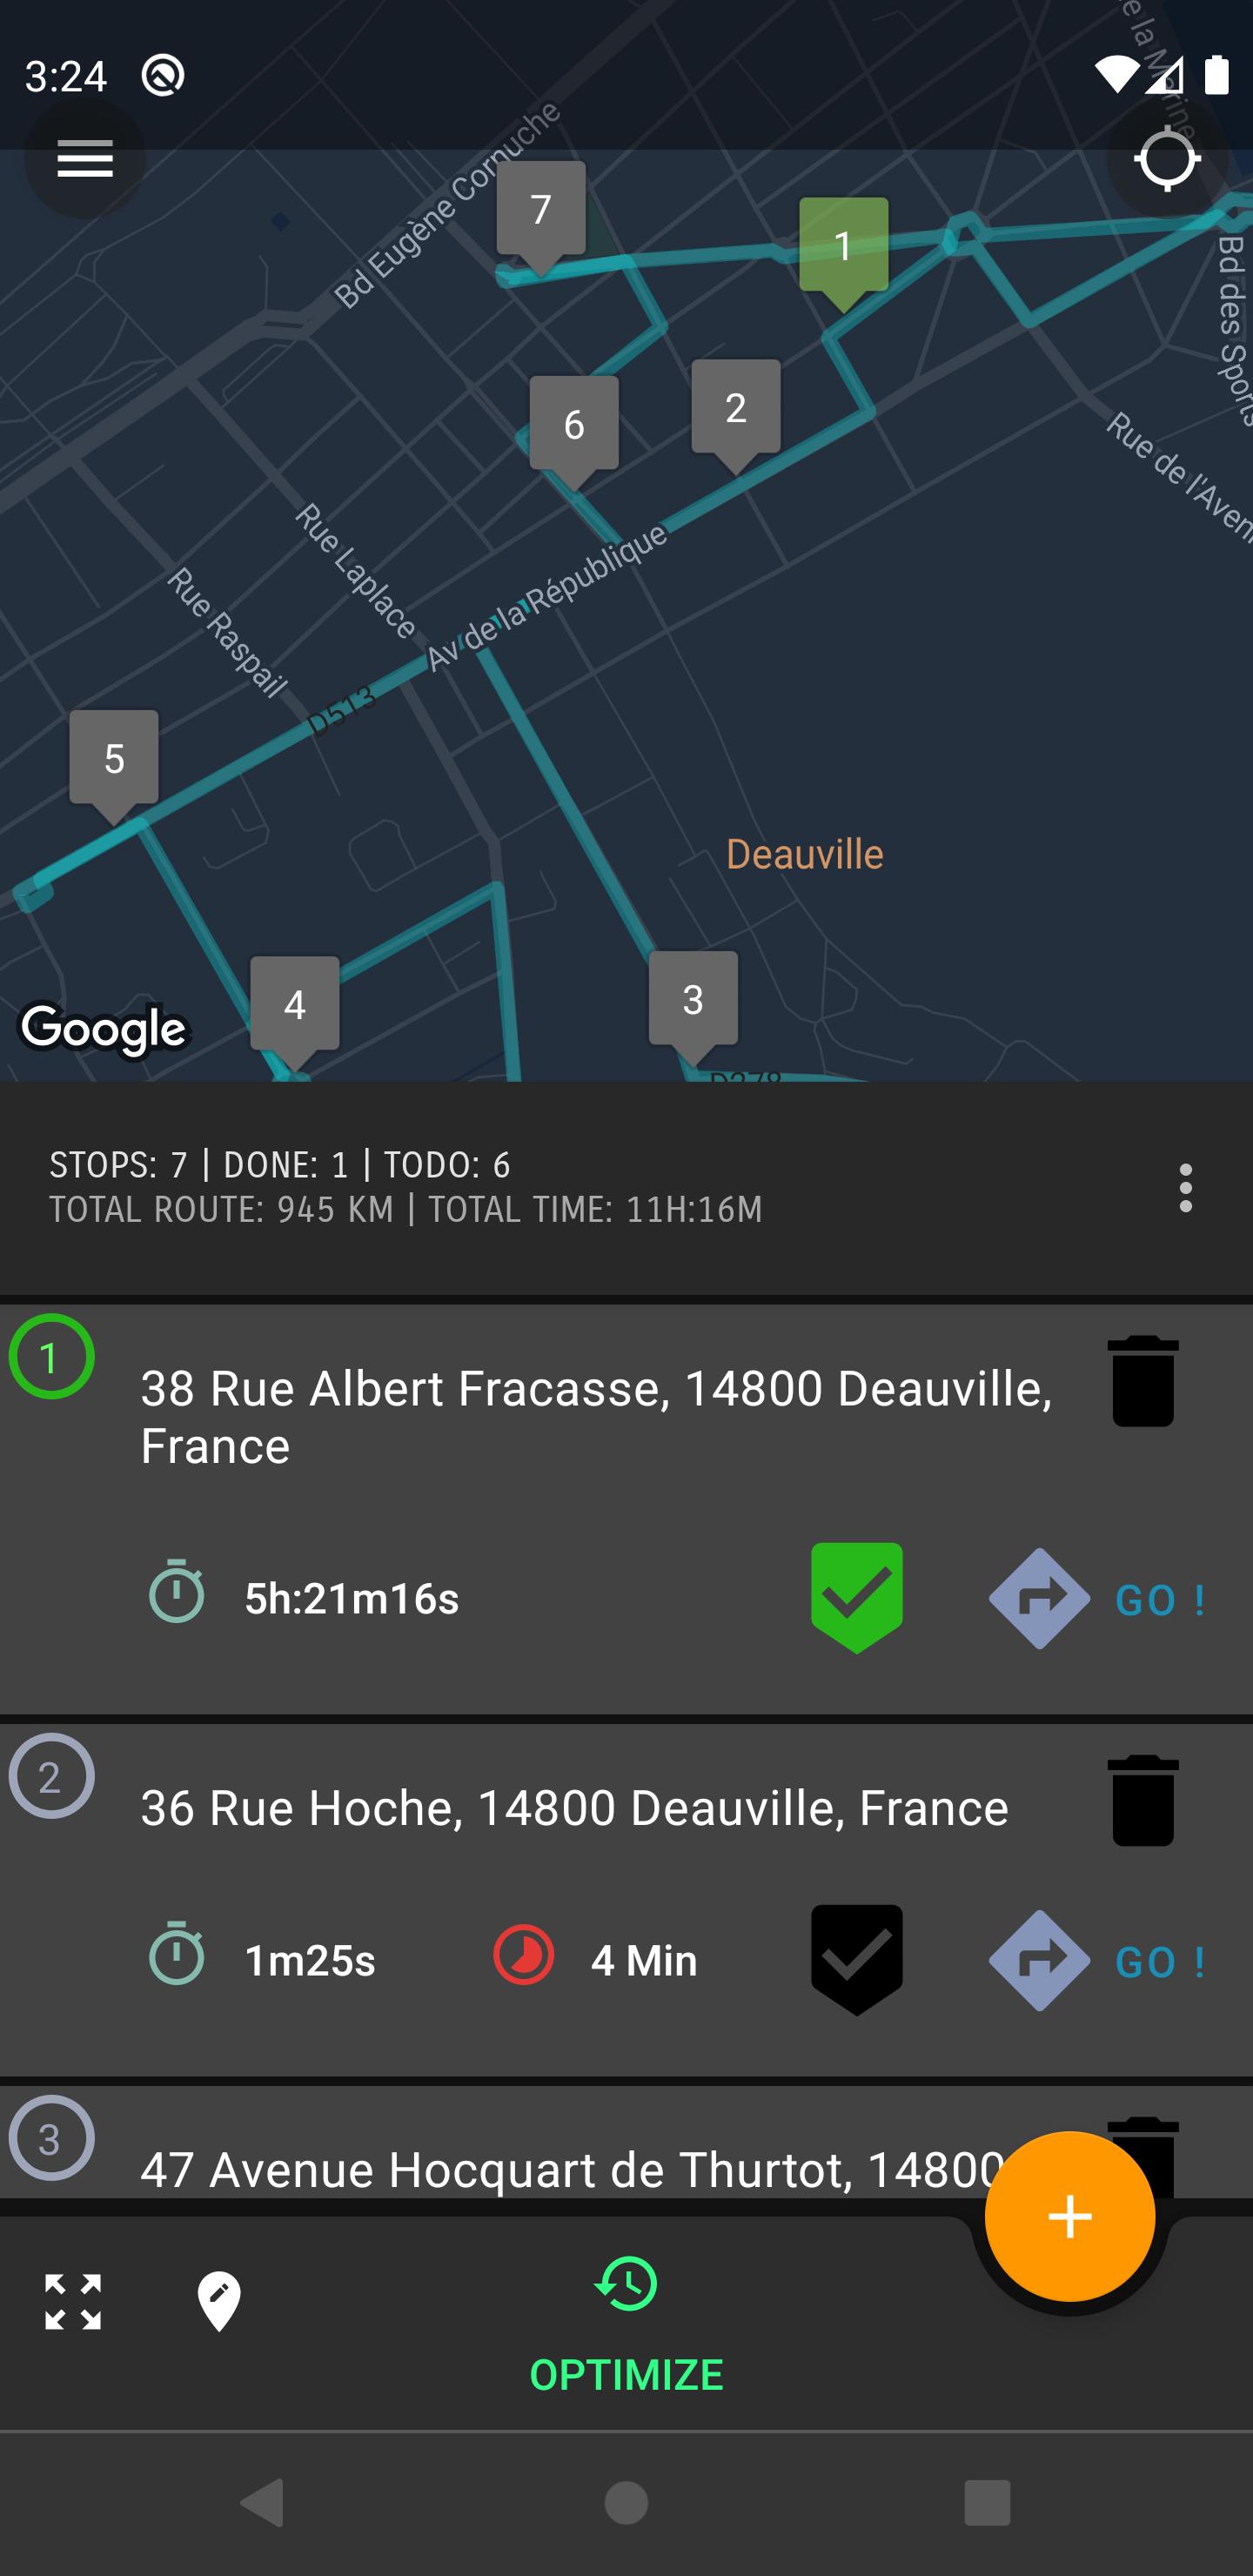 Vision Route Planner—Delivery Multi Stop Optimizer 1.66 Screenshot 19